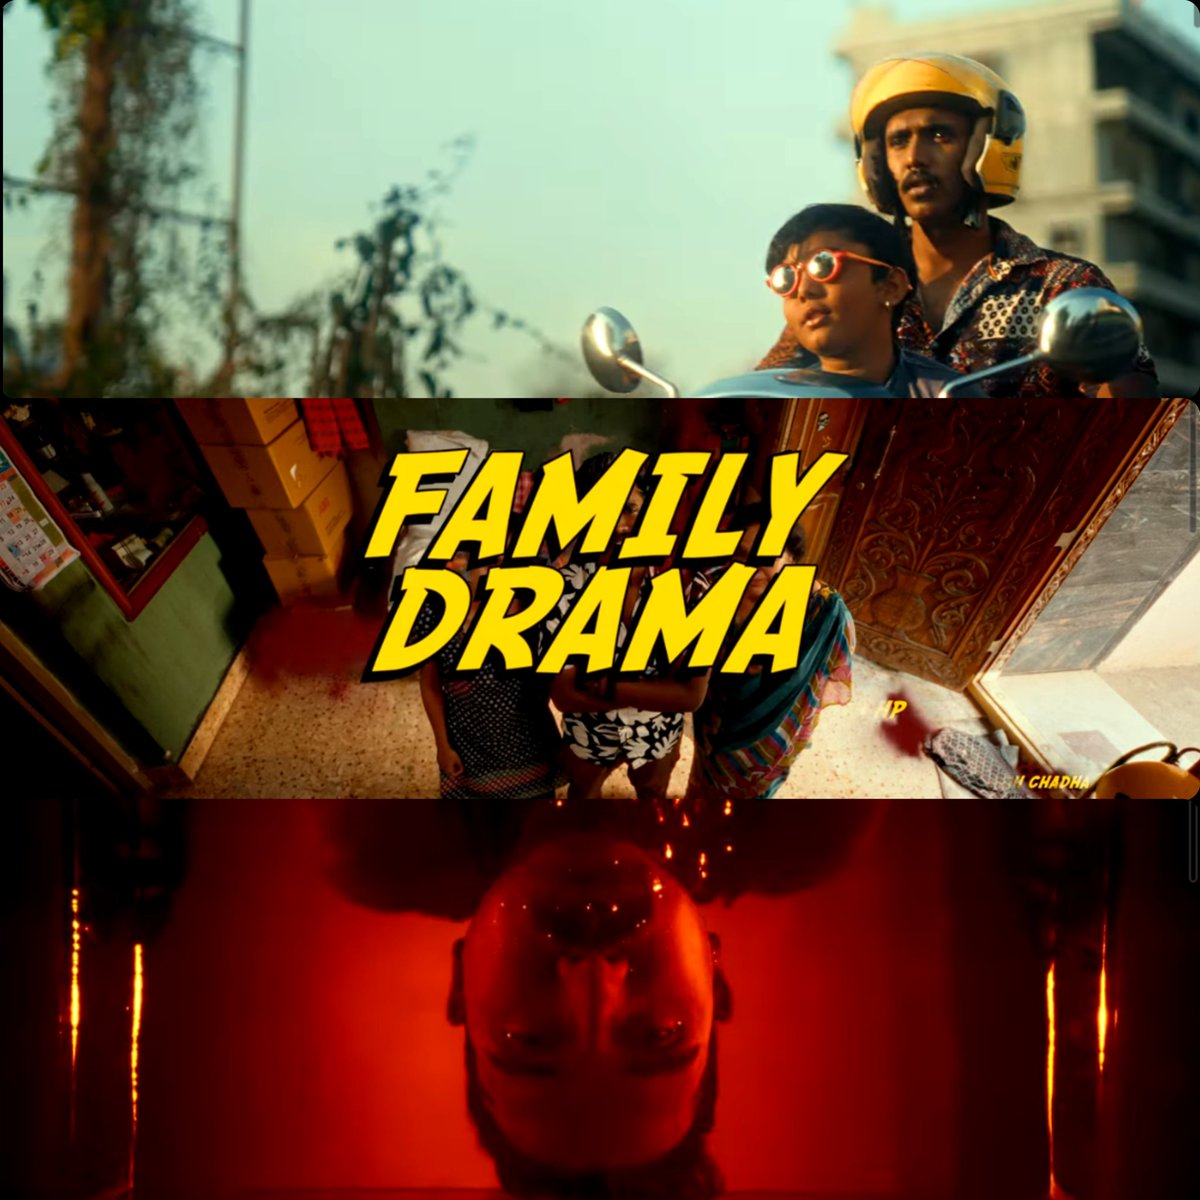 There is a cult following for wacky crime comedy films in India that includes #DelhiBelly,#Doctor, #KeedaCola, and #LooopLapeta, which is not celebrated by the masses, but this who love it, love it to the core. The trailer of #FamilyDrama ensures it is from the same 'family'.